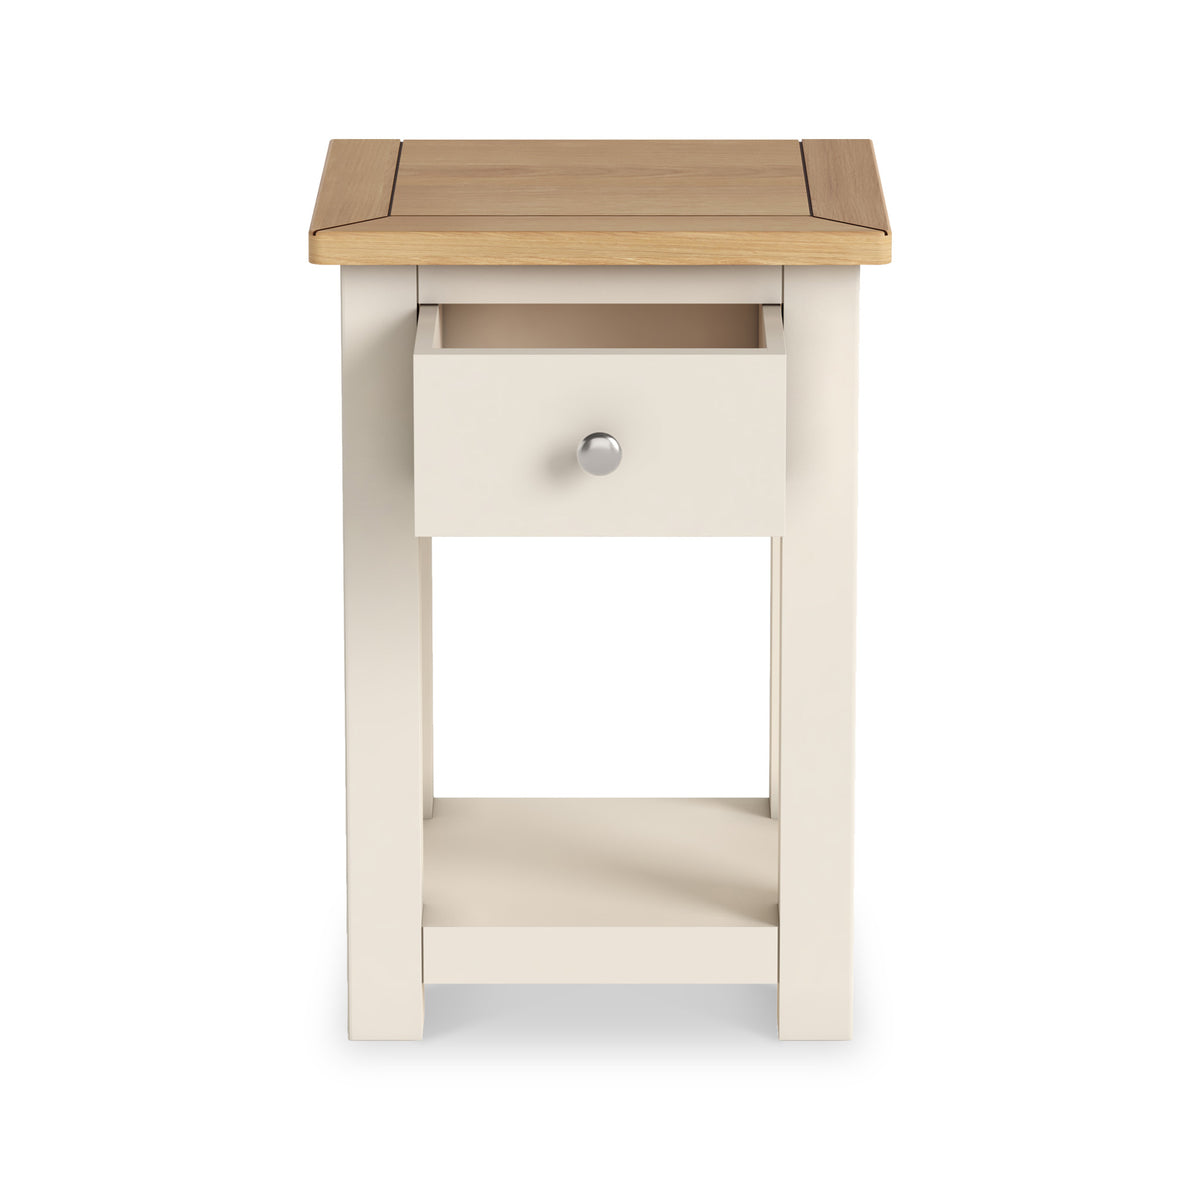 Duchy Linen Cream 1 Drawer Bedside Table with Oak Top